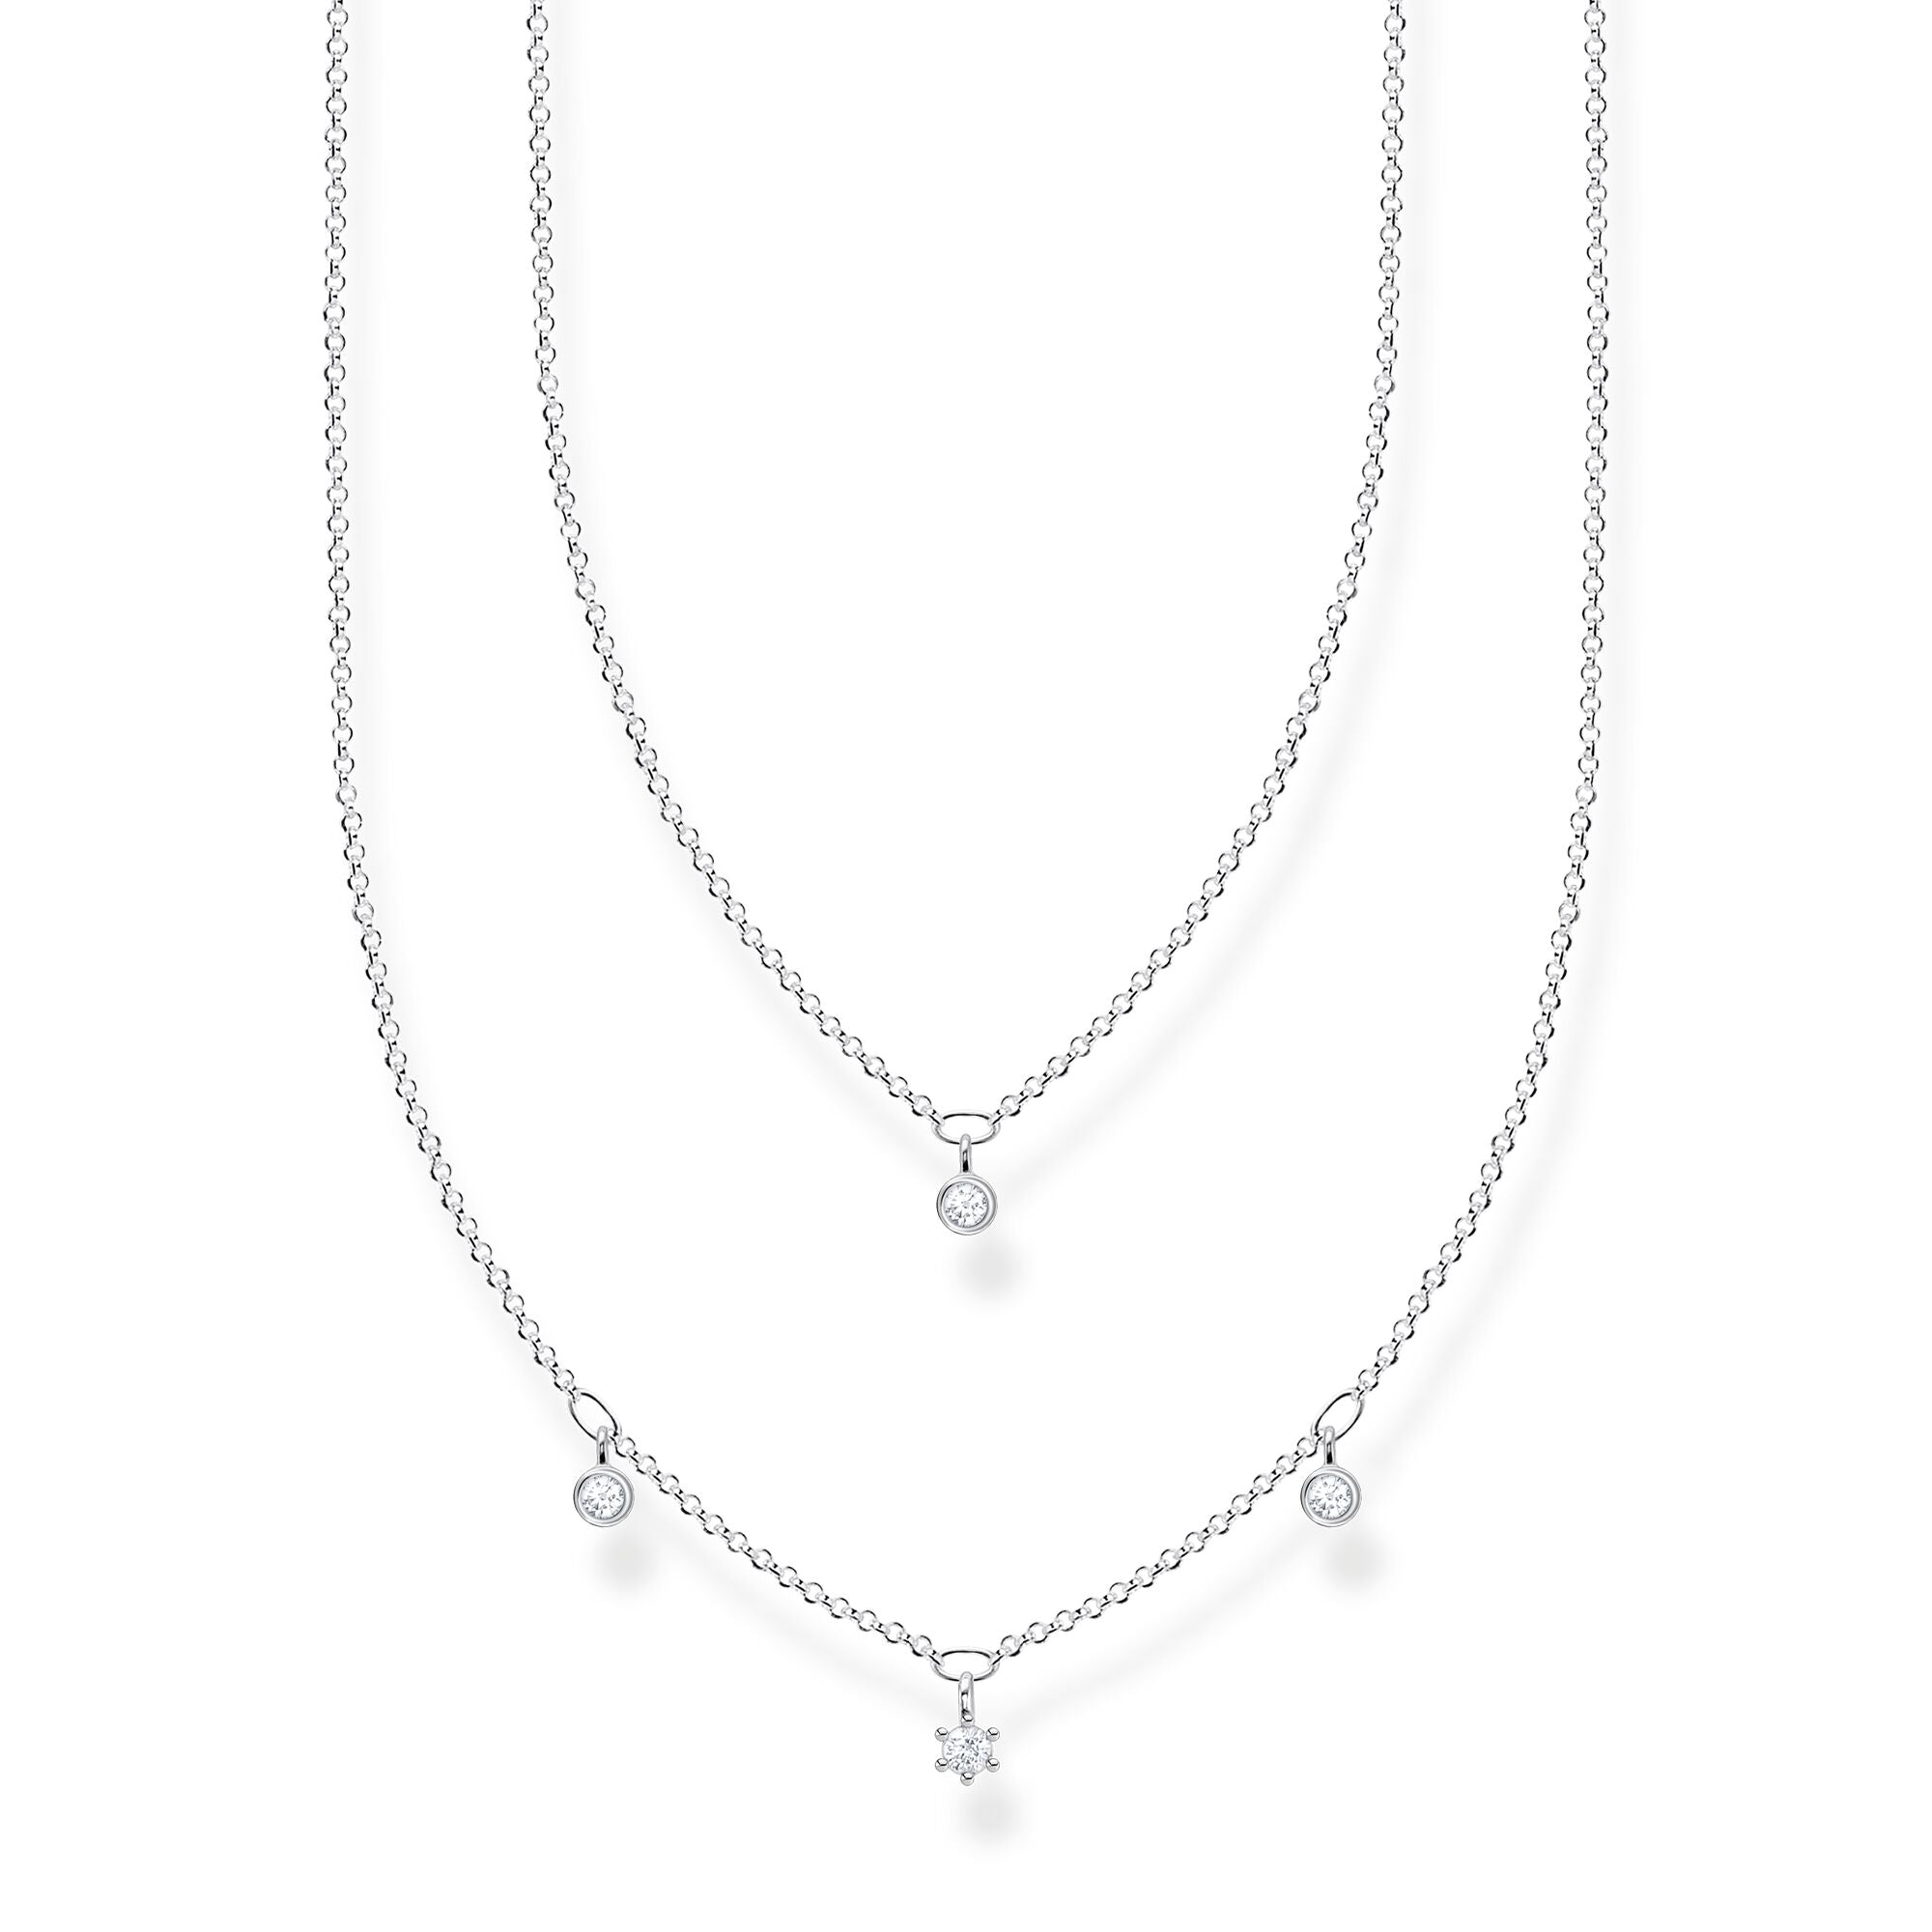 Double Row Necklace With White Stones - Silver